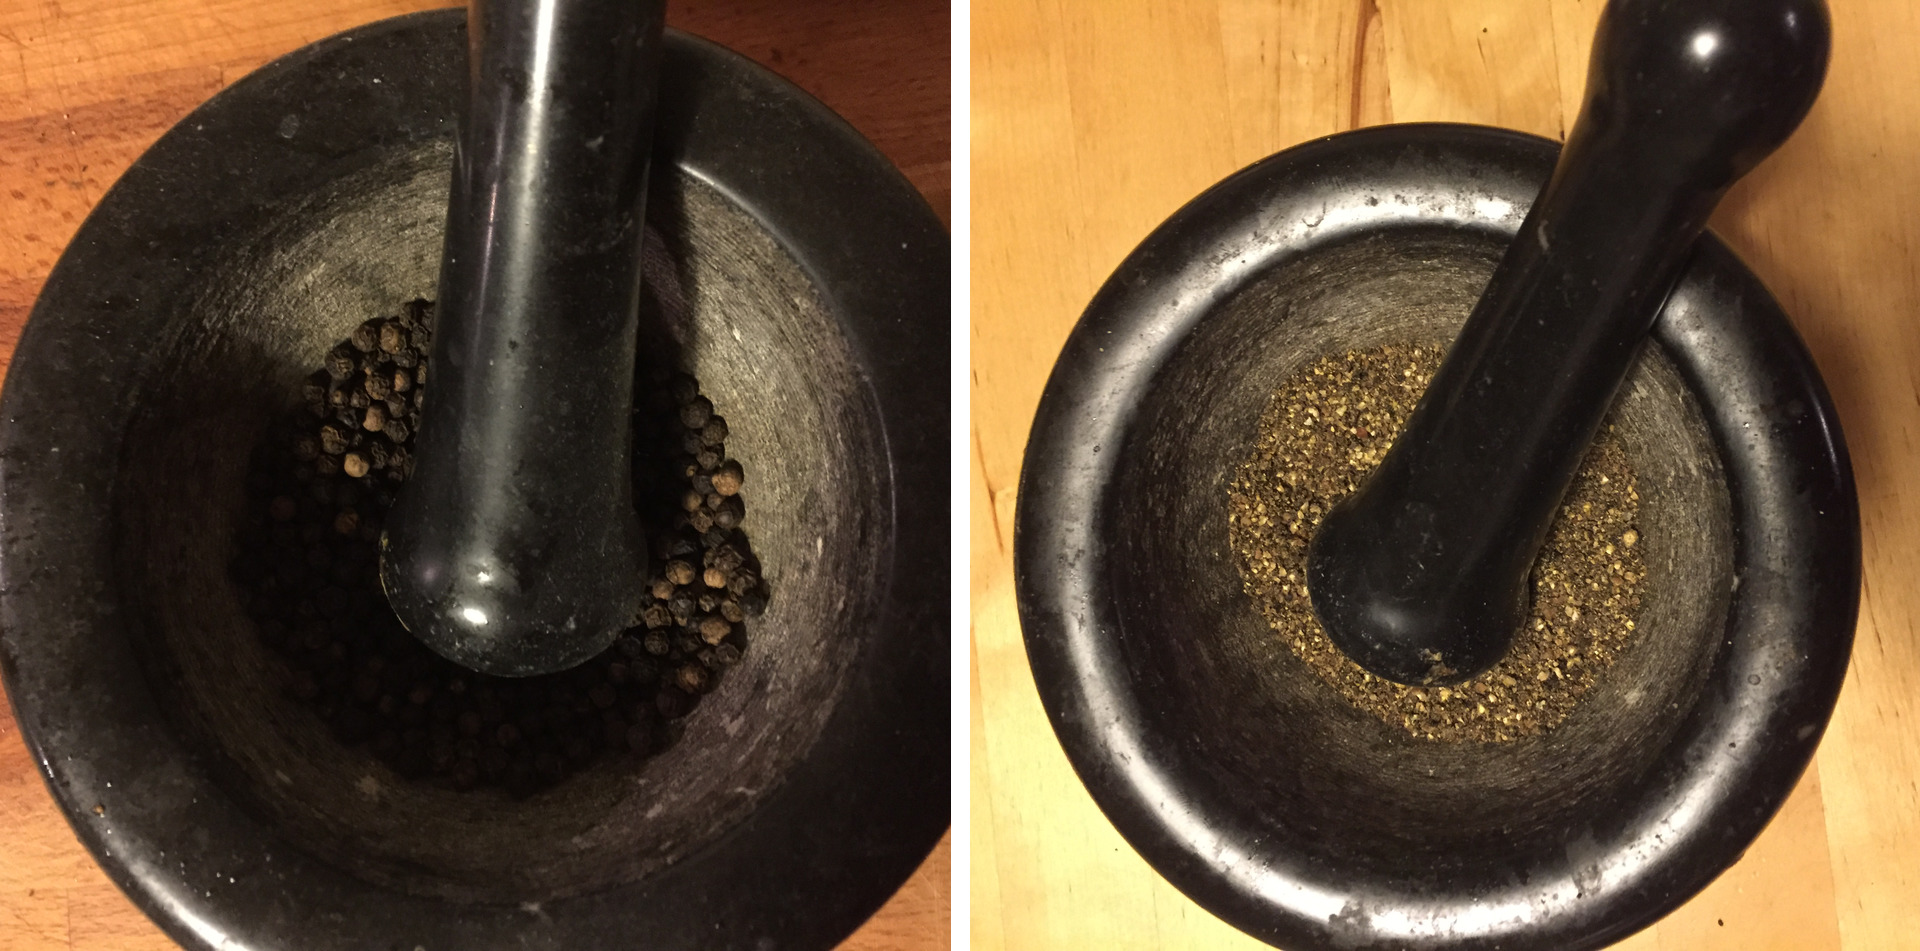 Crunching the pepper with a mortar and pestle